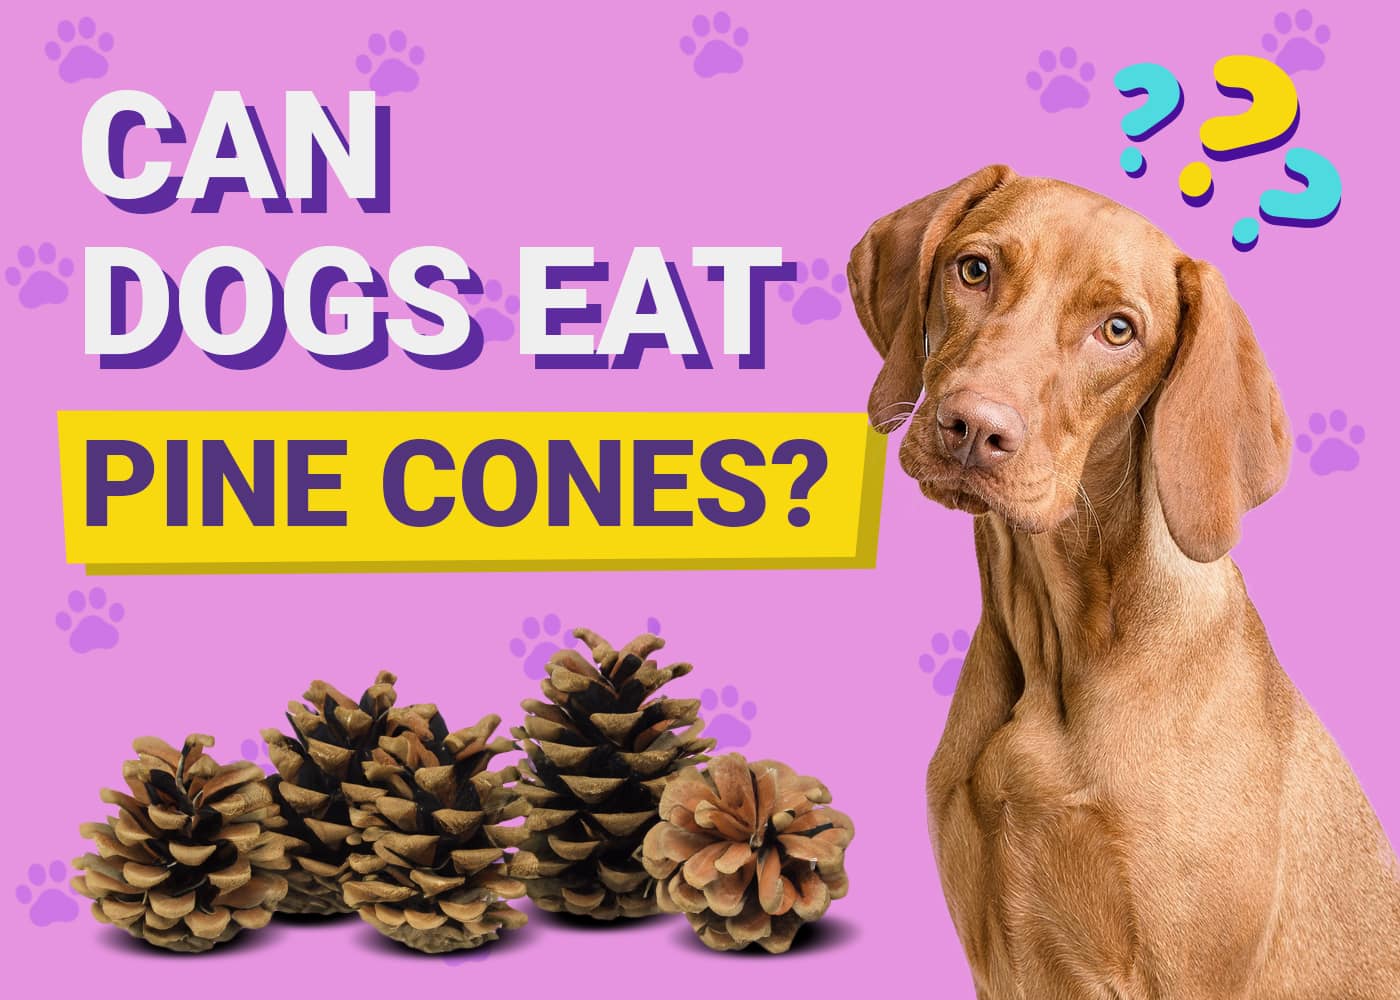 Can Dogs Eat Pine Cones